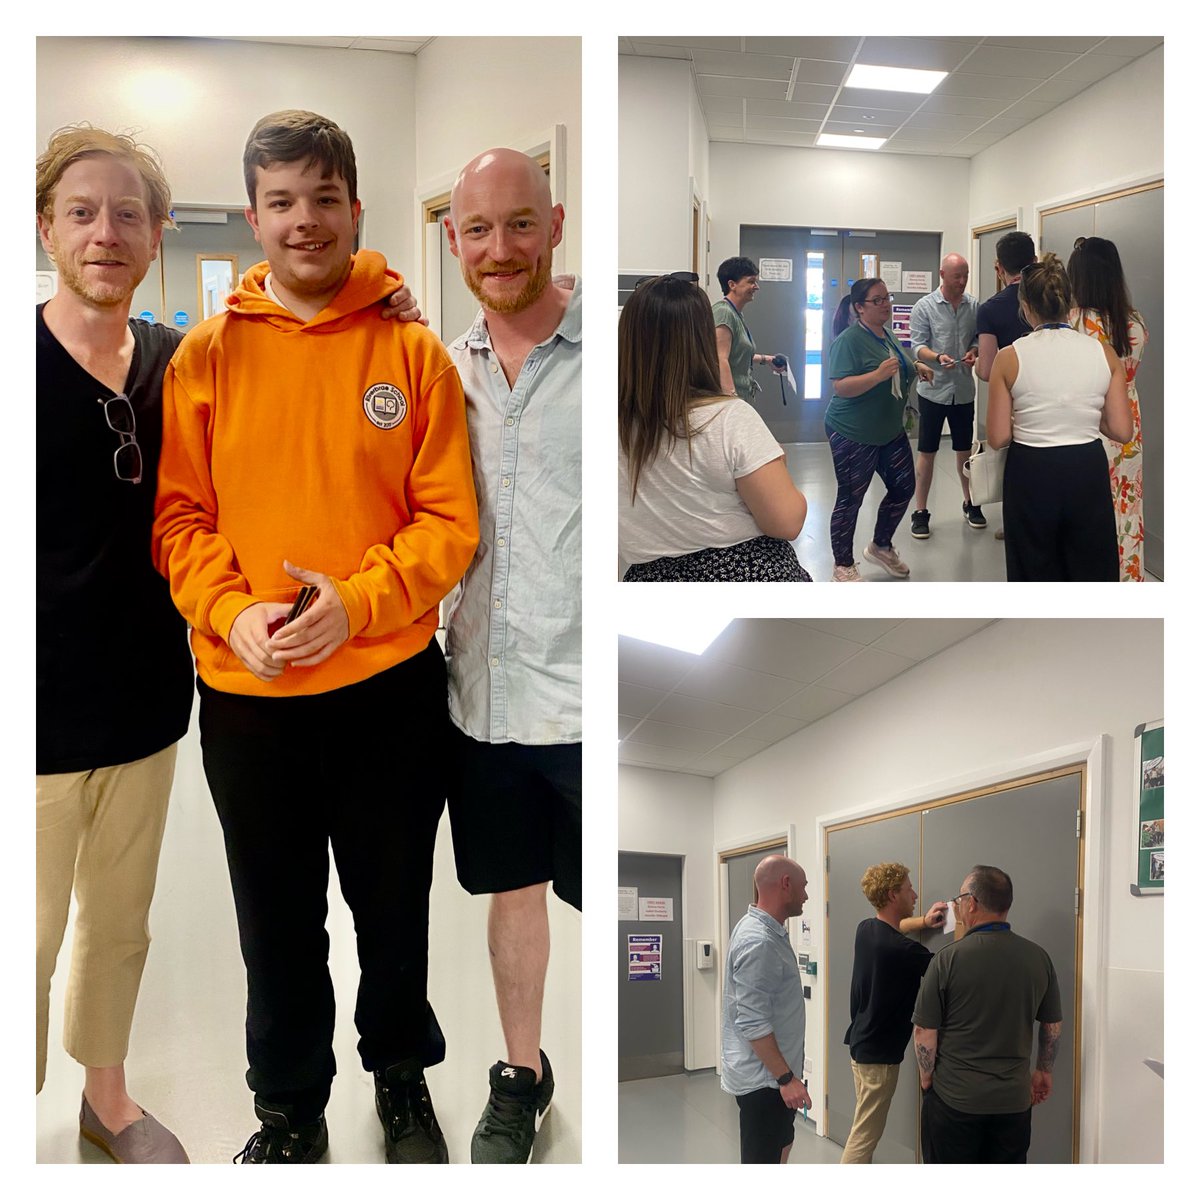 Music therapy with Stella ⁦@nordoffrobbins⁩ has rarely been this popular! Perhaps it was something to do with James & Ben from ⁦@BiffyClyro⁩ who joined our pupils for a music therapy session. One of our leavers joined the line of autograph hunters. Thanks guys!